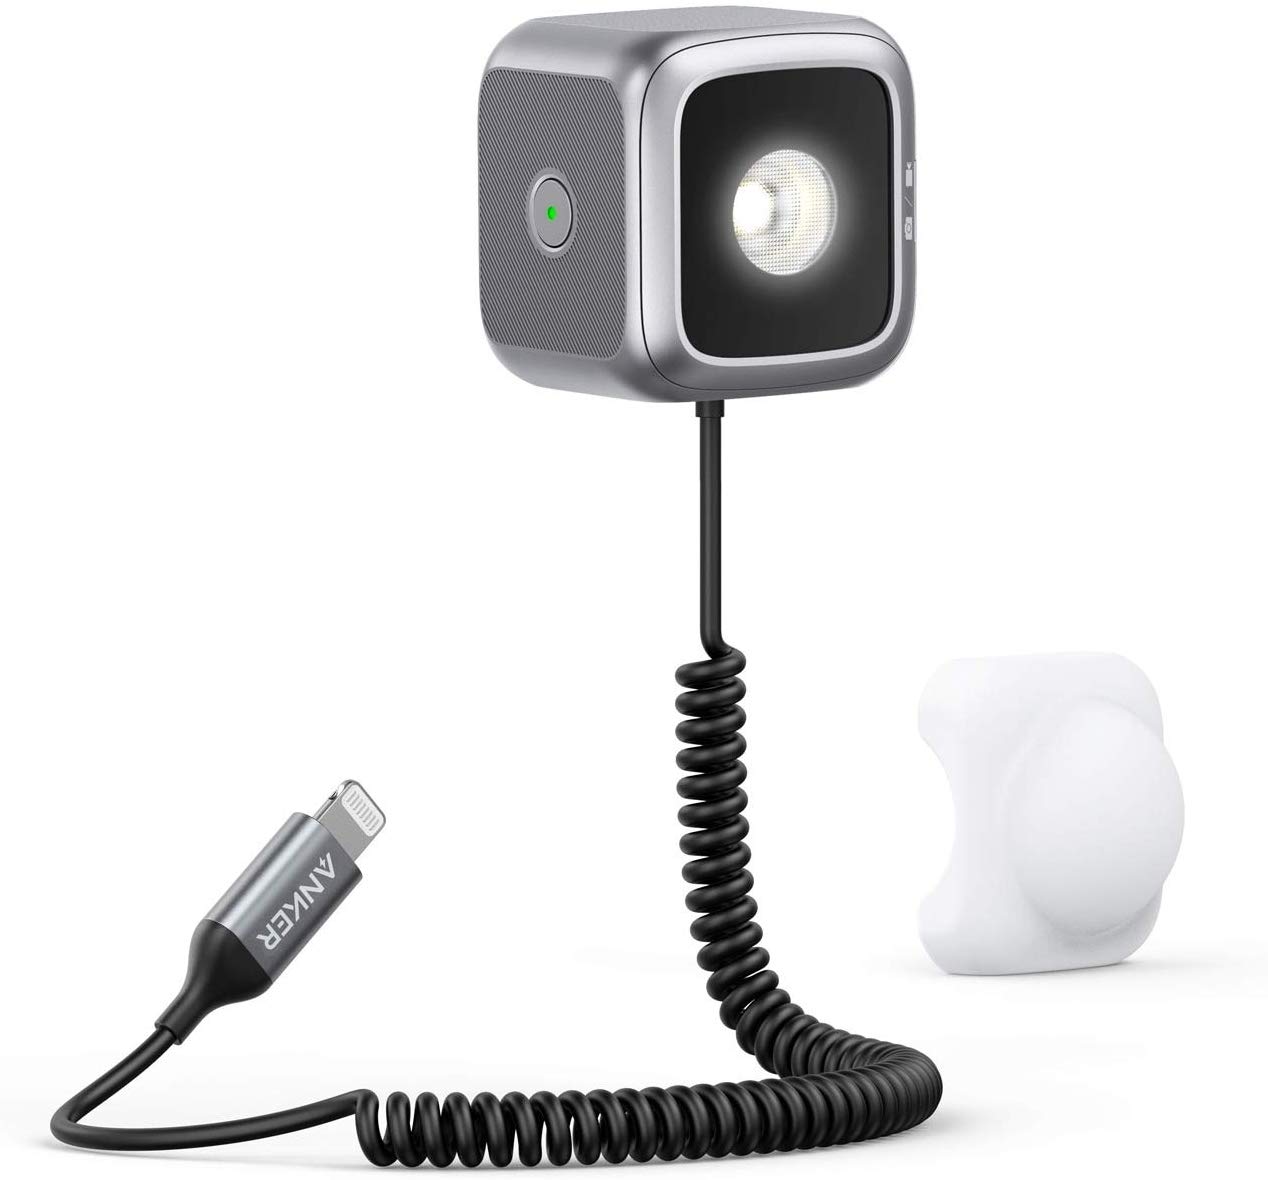 Anker MFi LED Flash for iPhone Now Available to Order